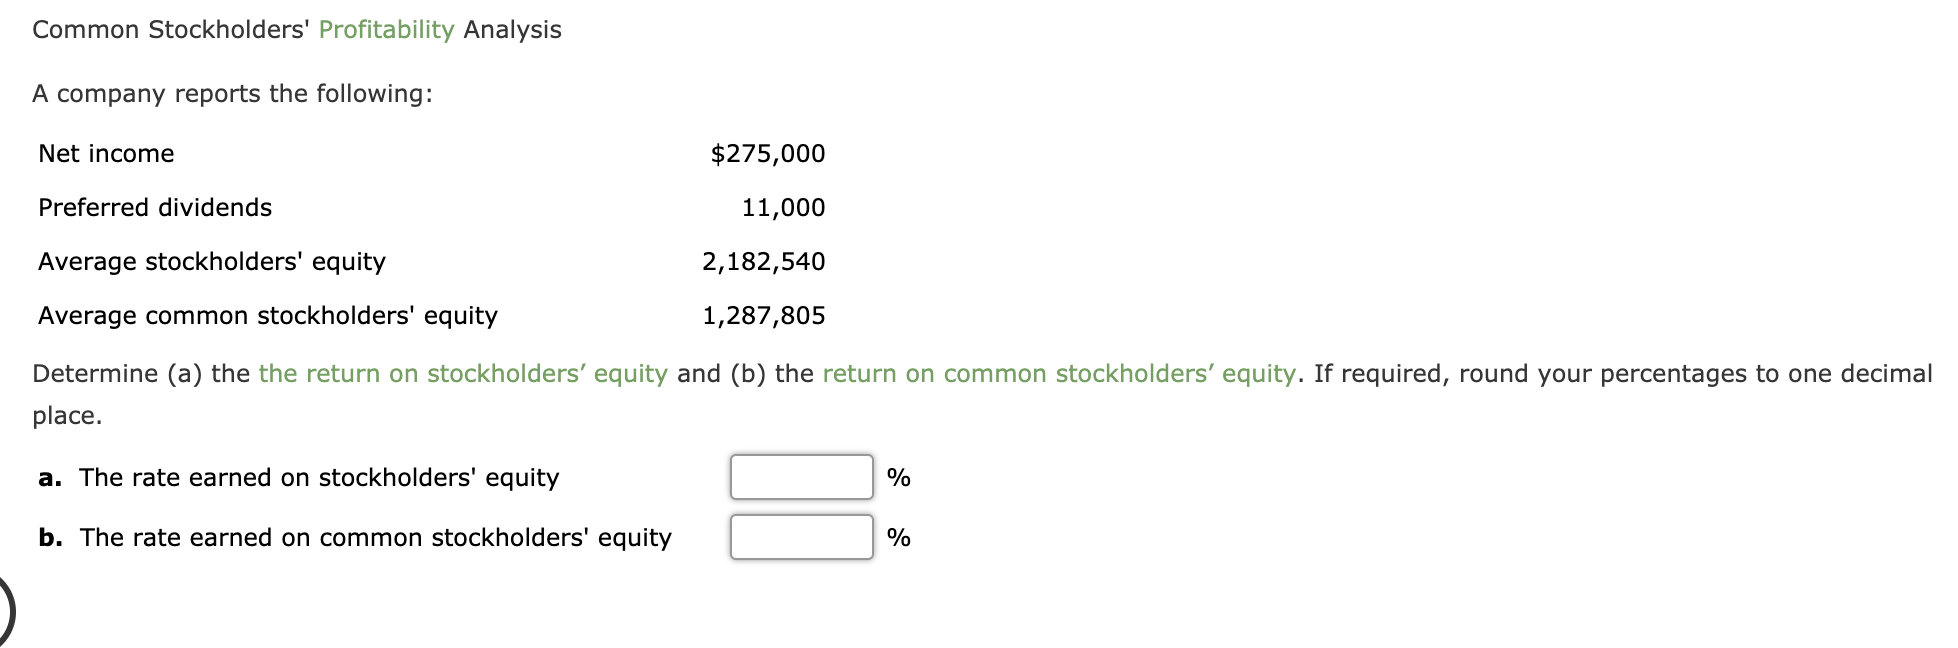 a. The rate earned on stockholders' equity
%
b. The rate earned on common stockholders' equity
